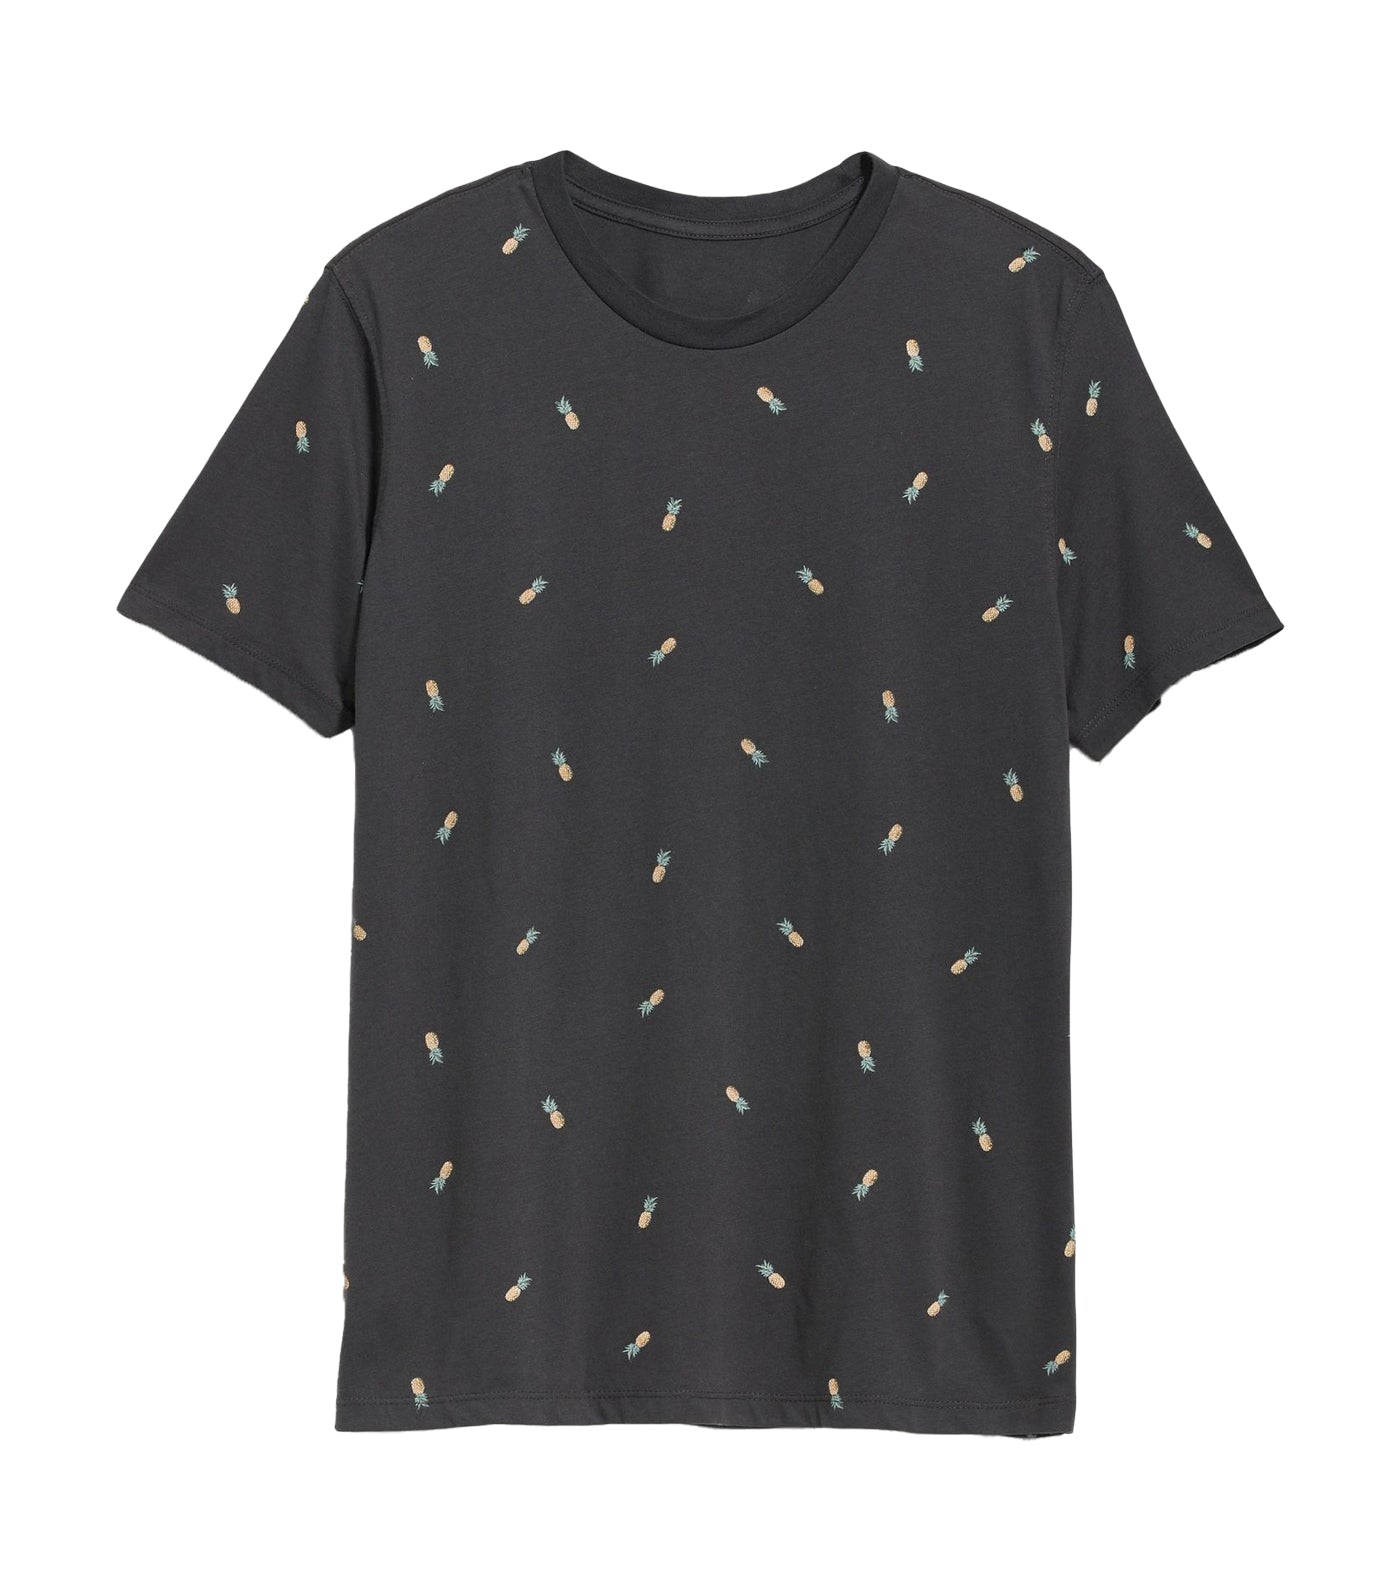 Soft-Washed Printed Crew-Neck T-Shirt for Men Pineapple